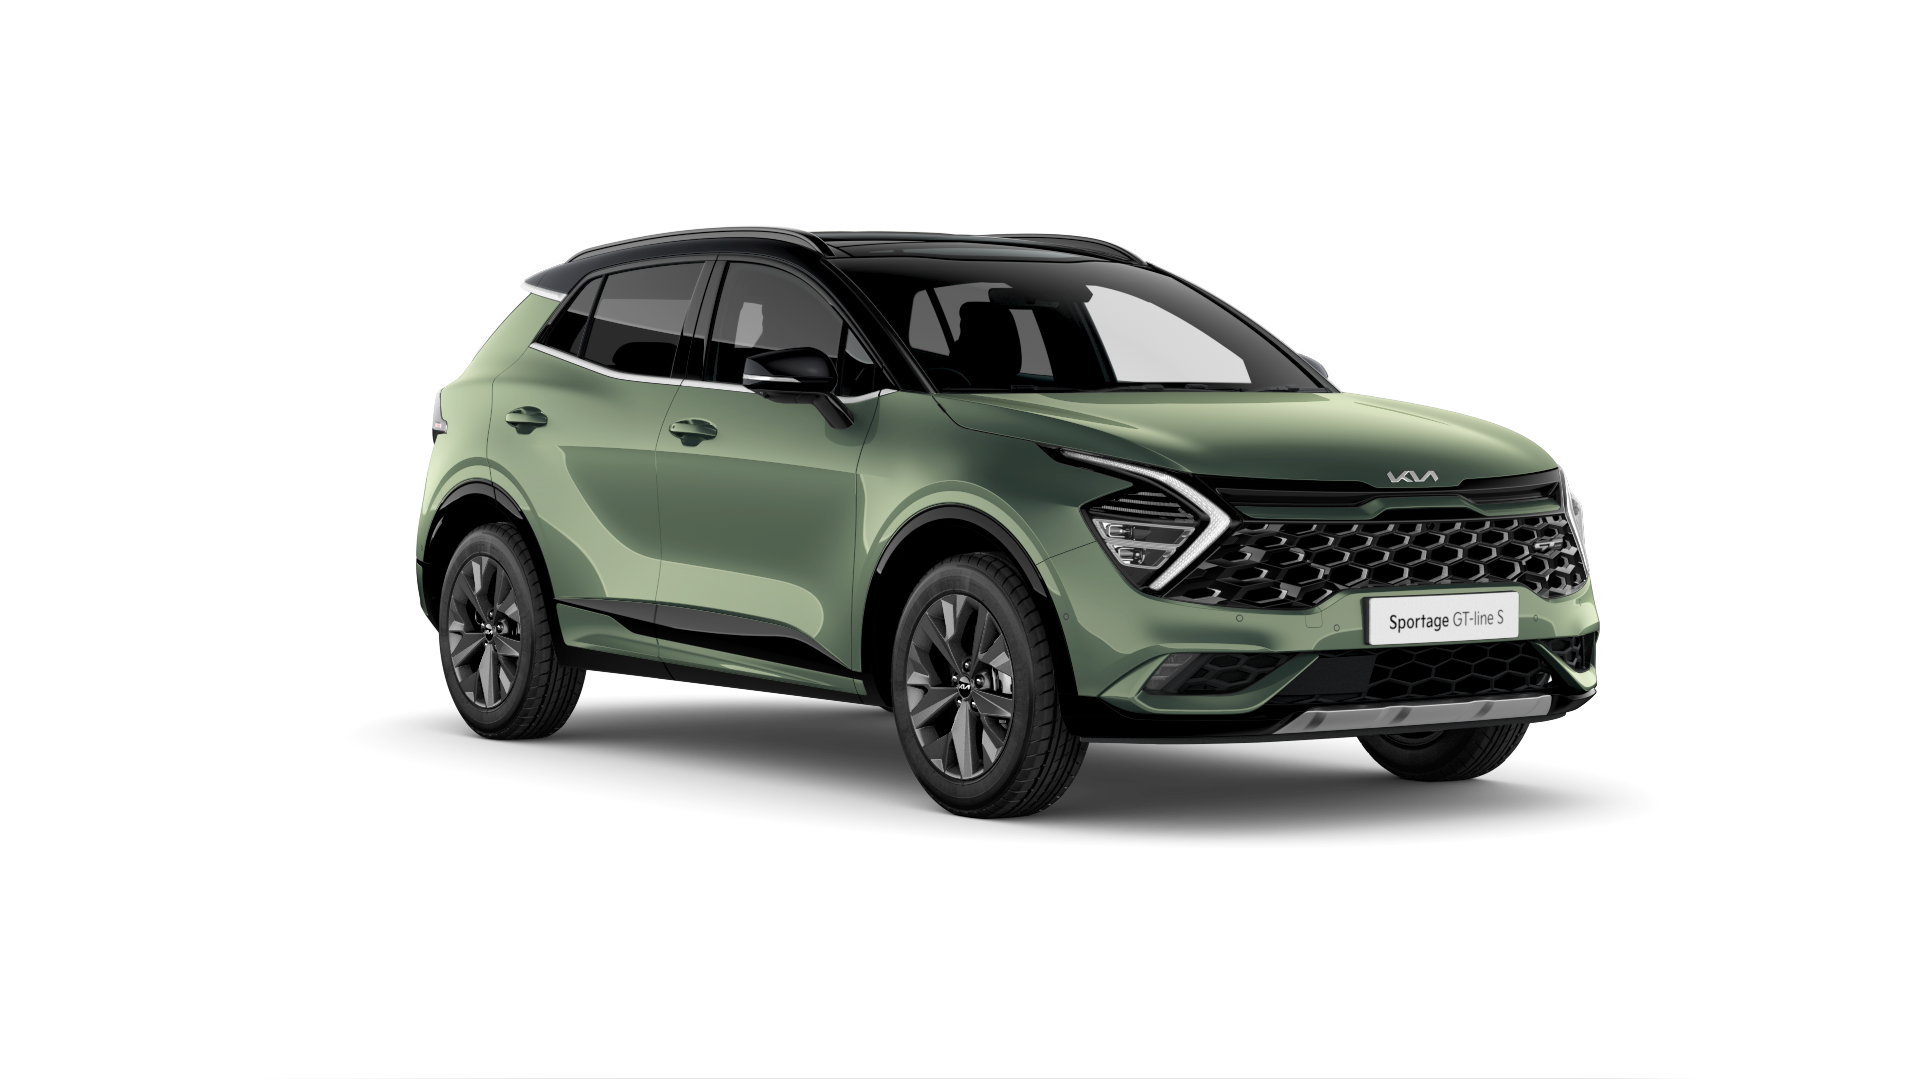 Kia Sportage 2018 Gt Line S Hybrid Experience Green With Black Roof 0000